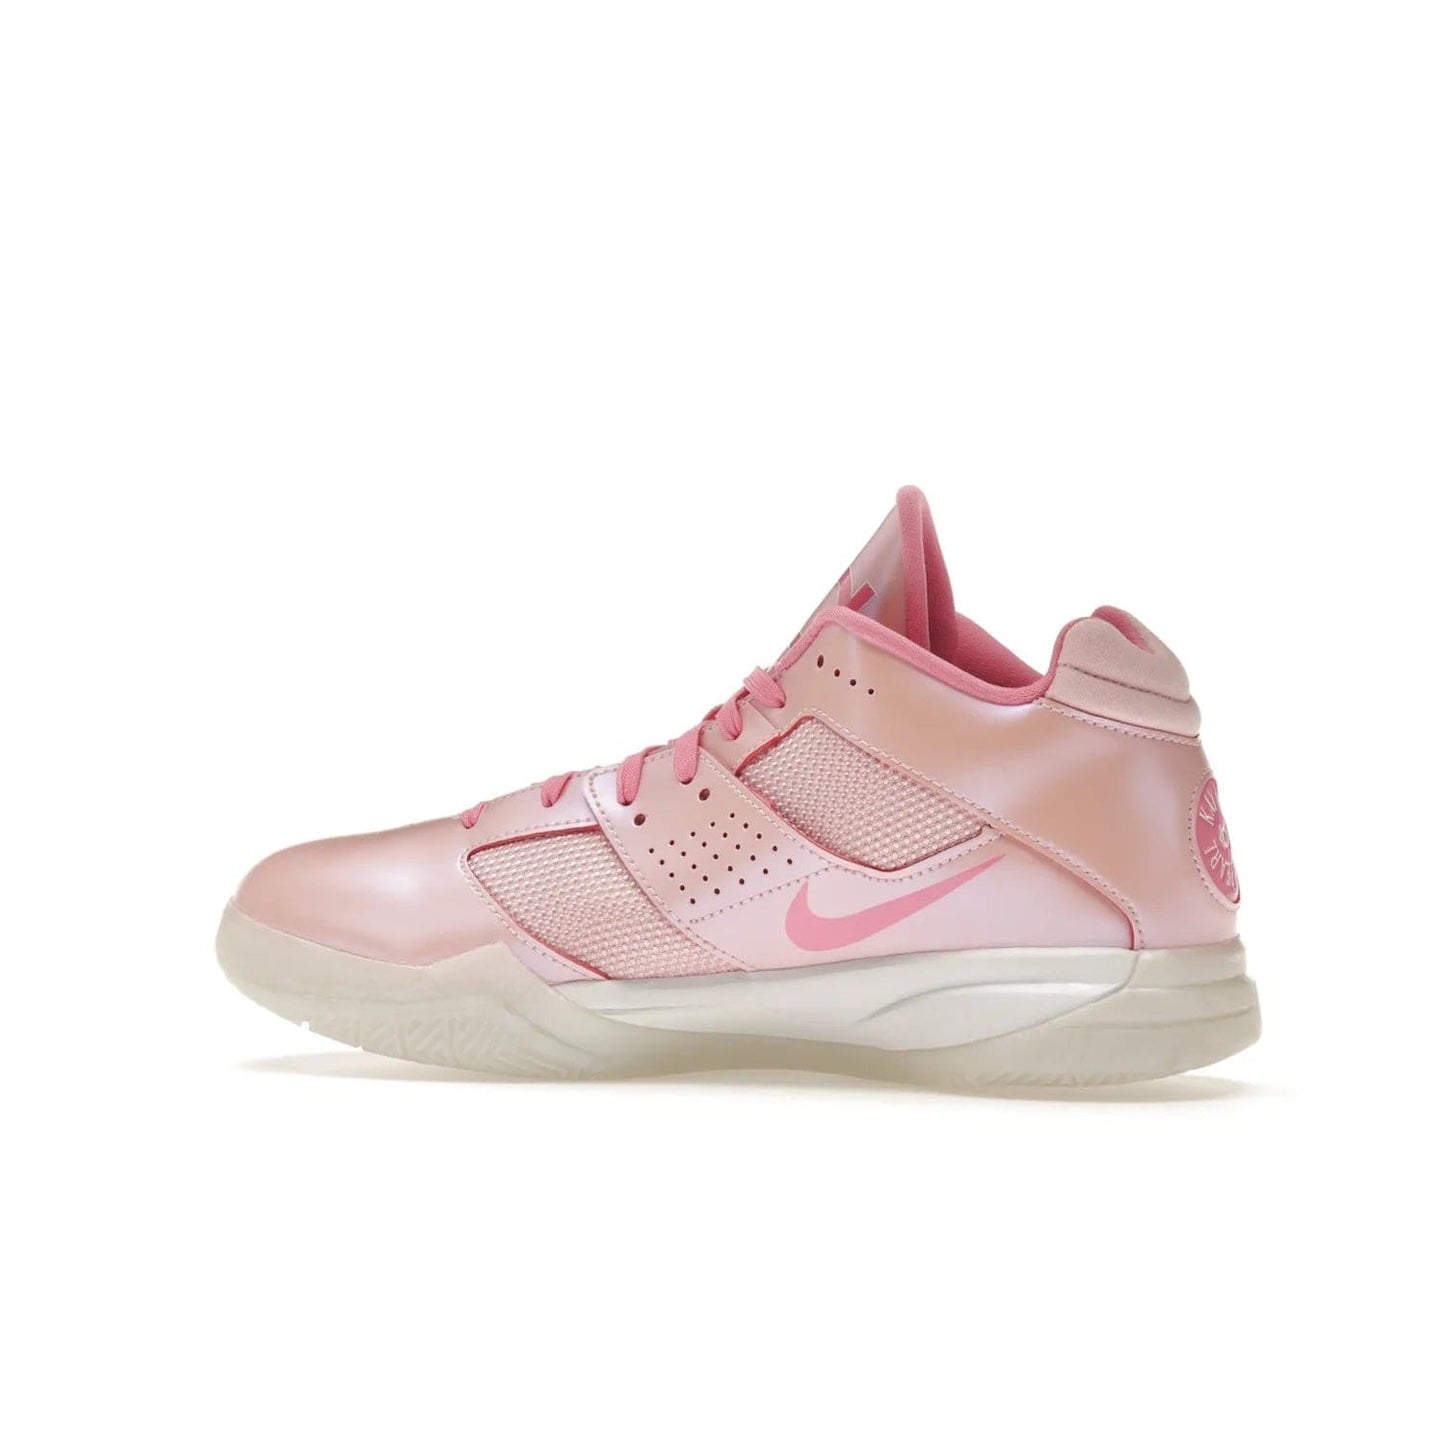 Nike KD 3 Aunt Pearl - Image 21 - Only at www.BallersClubKickz.com - Introducing the Nike KD 3 Aunt Pearl. Featuring a bold Medium Soft Pink, White, & Lotus Pink colorway. Get ready to stand out this October 15th.